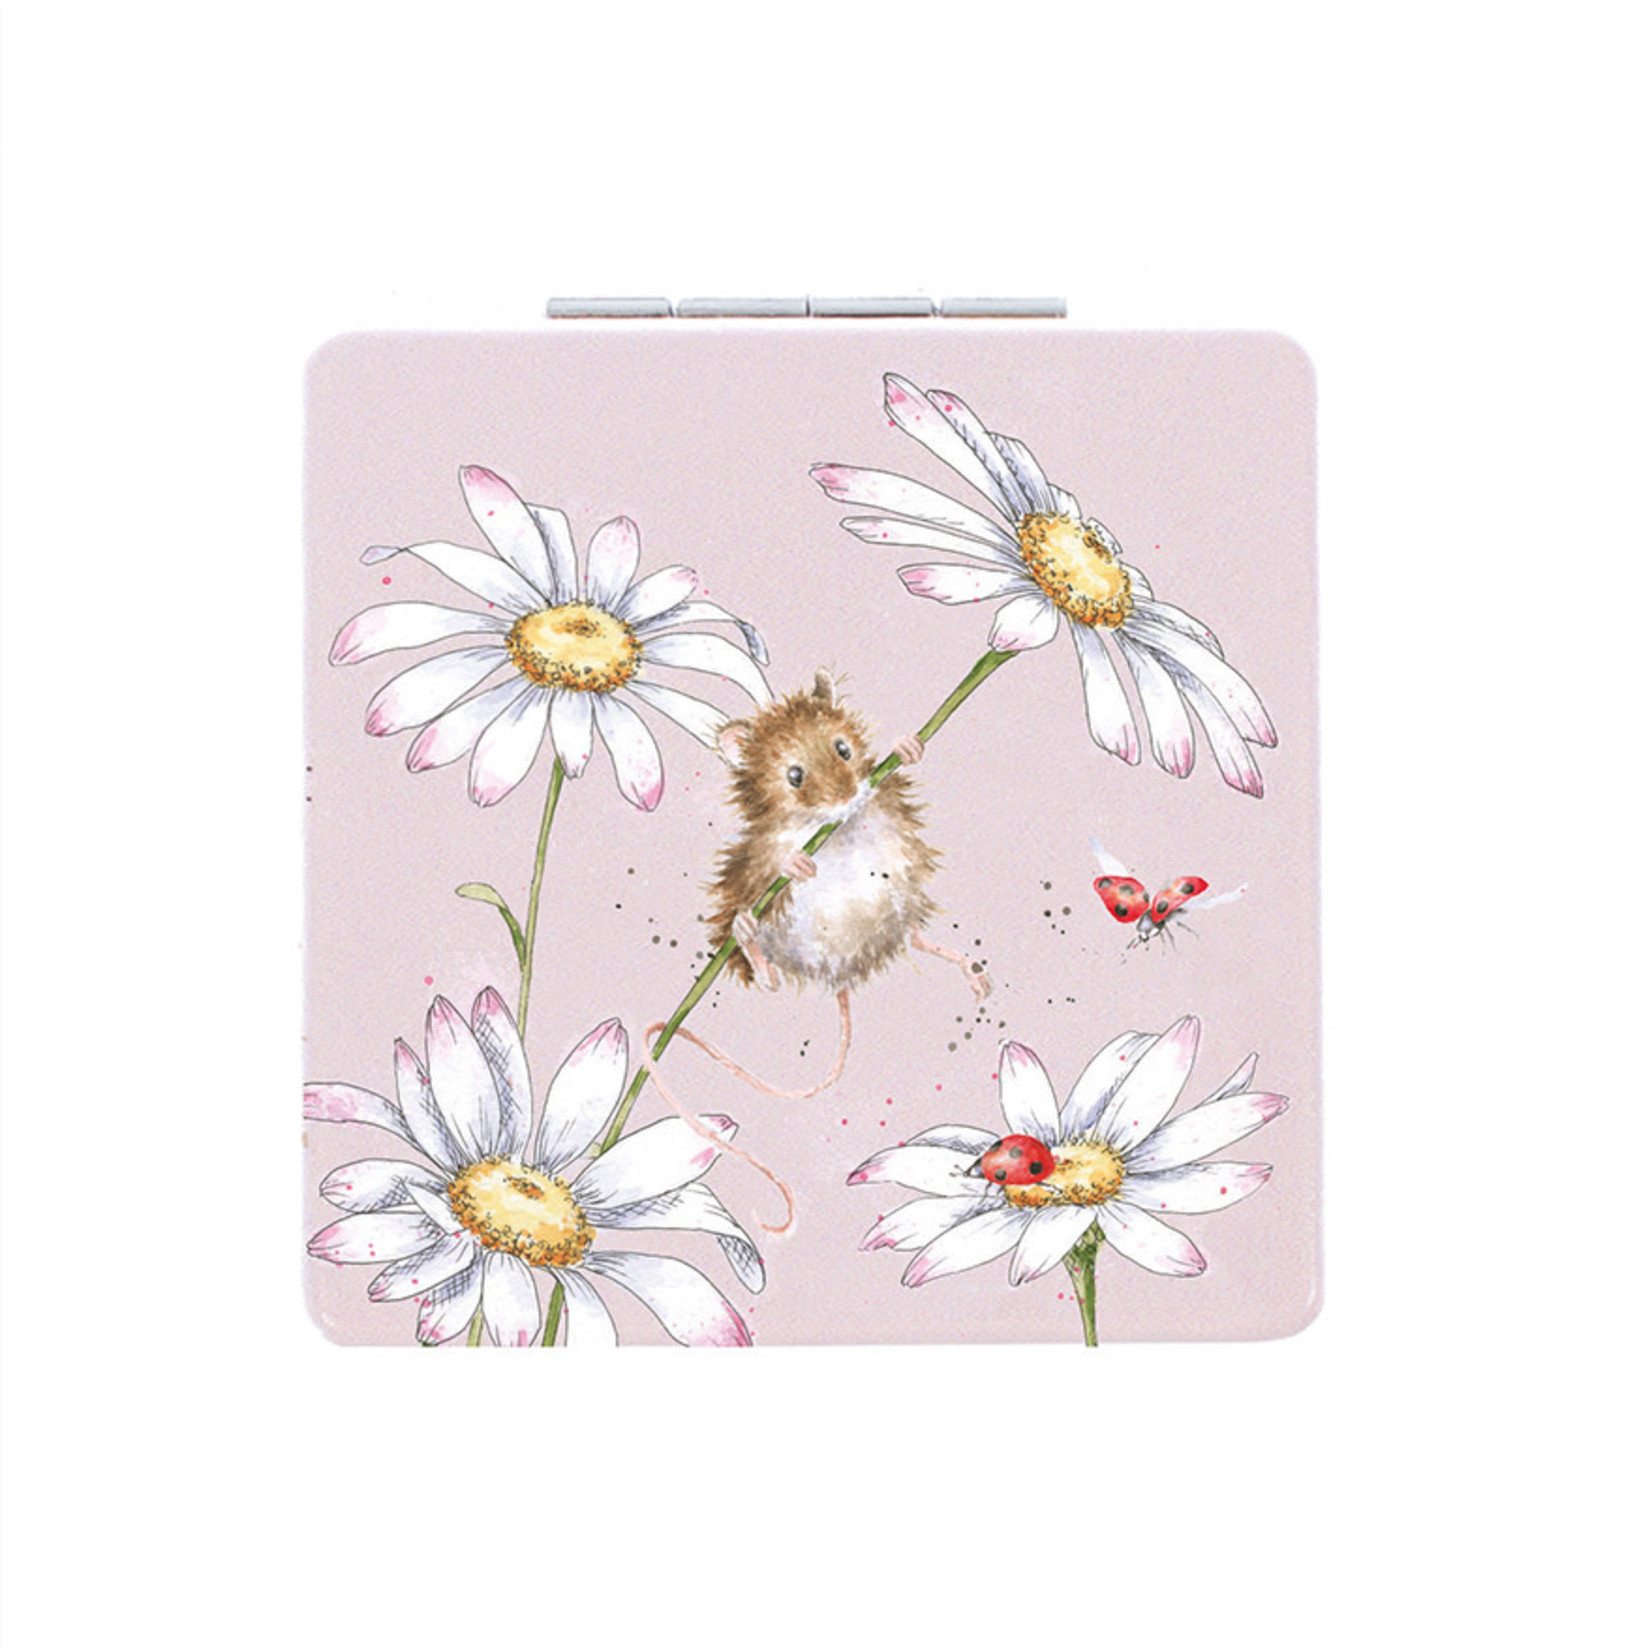 Wrendale Designs MR012 Compact Mirror - 'Oops A Daisy' Mouse